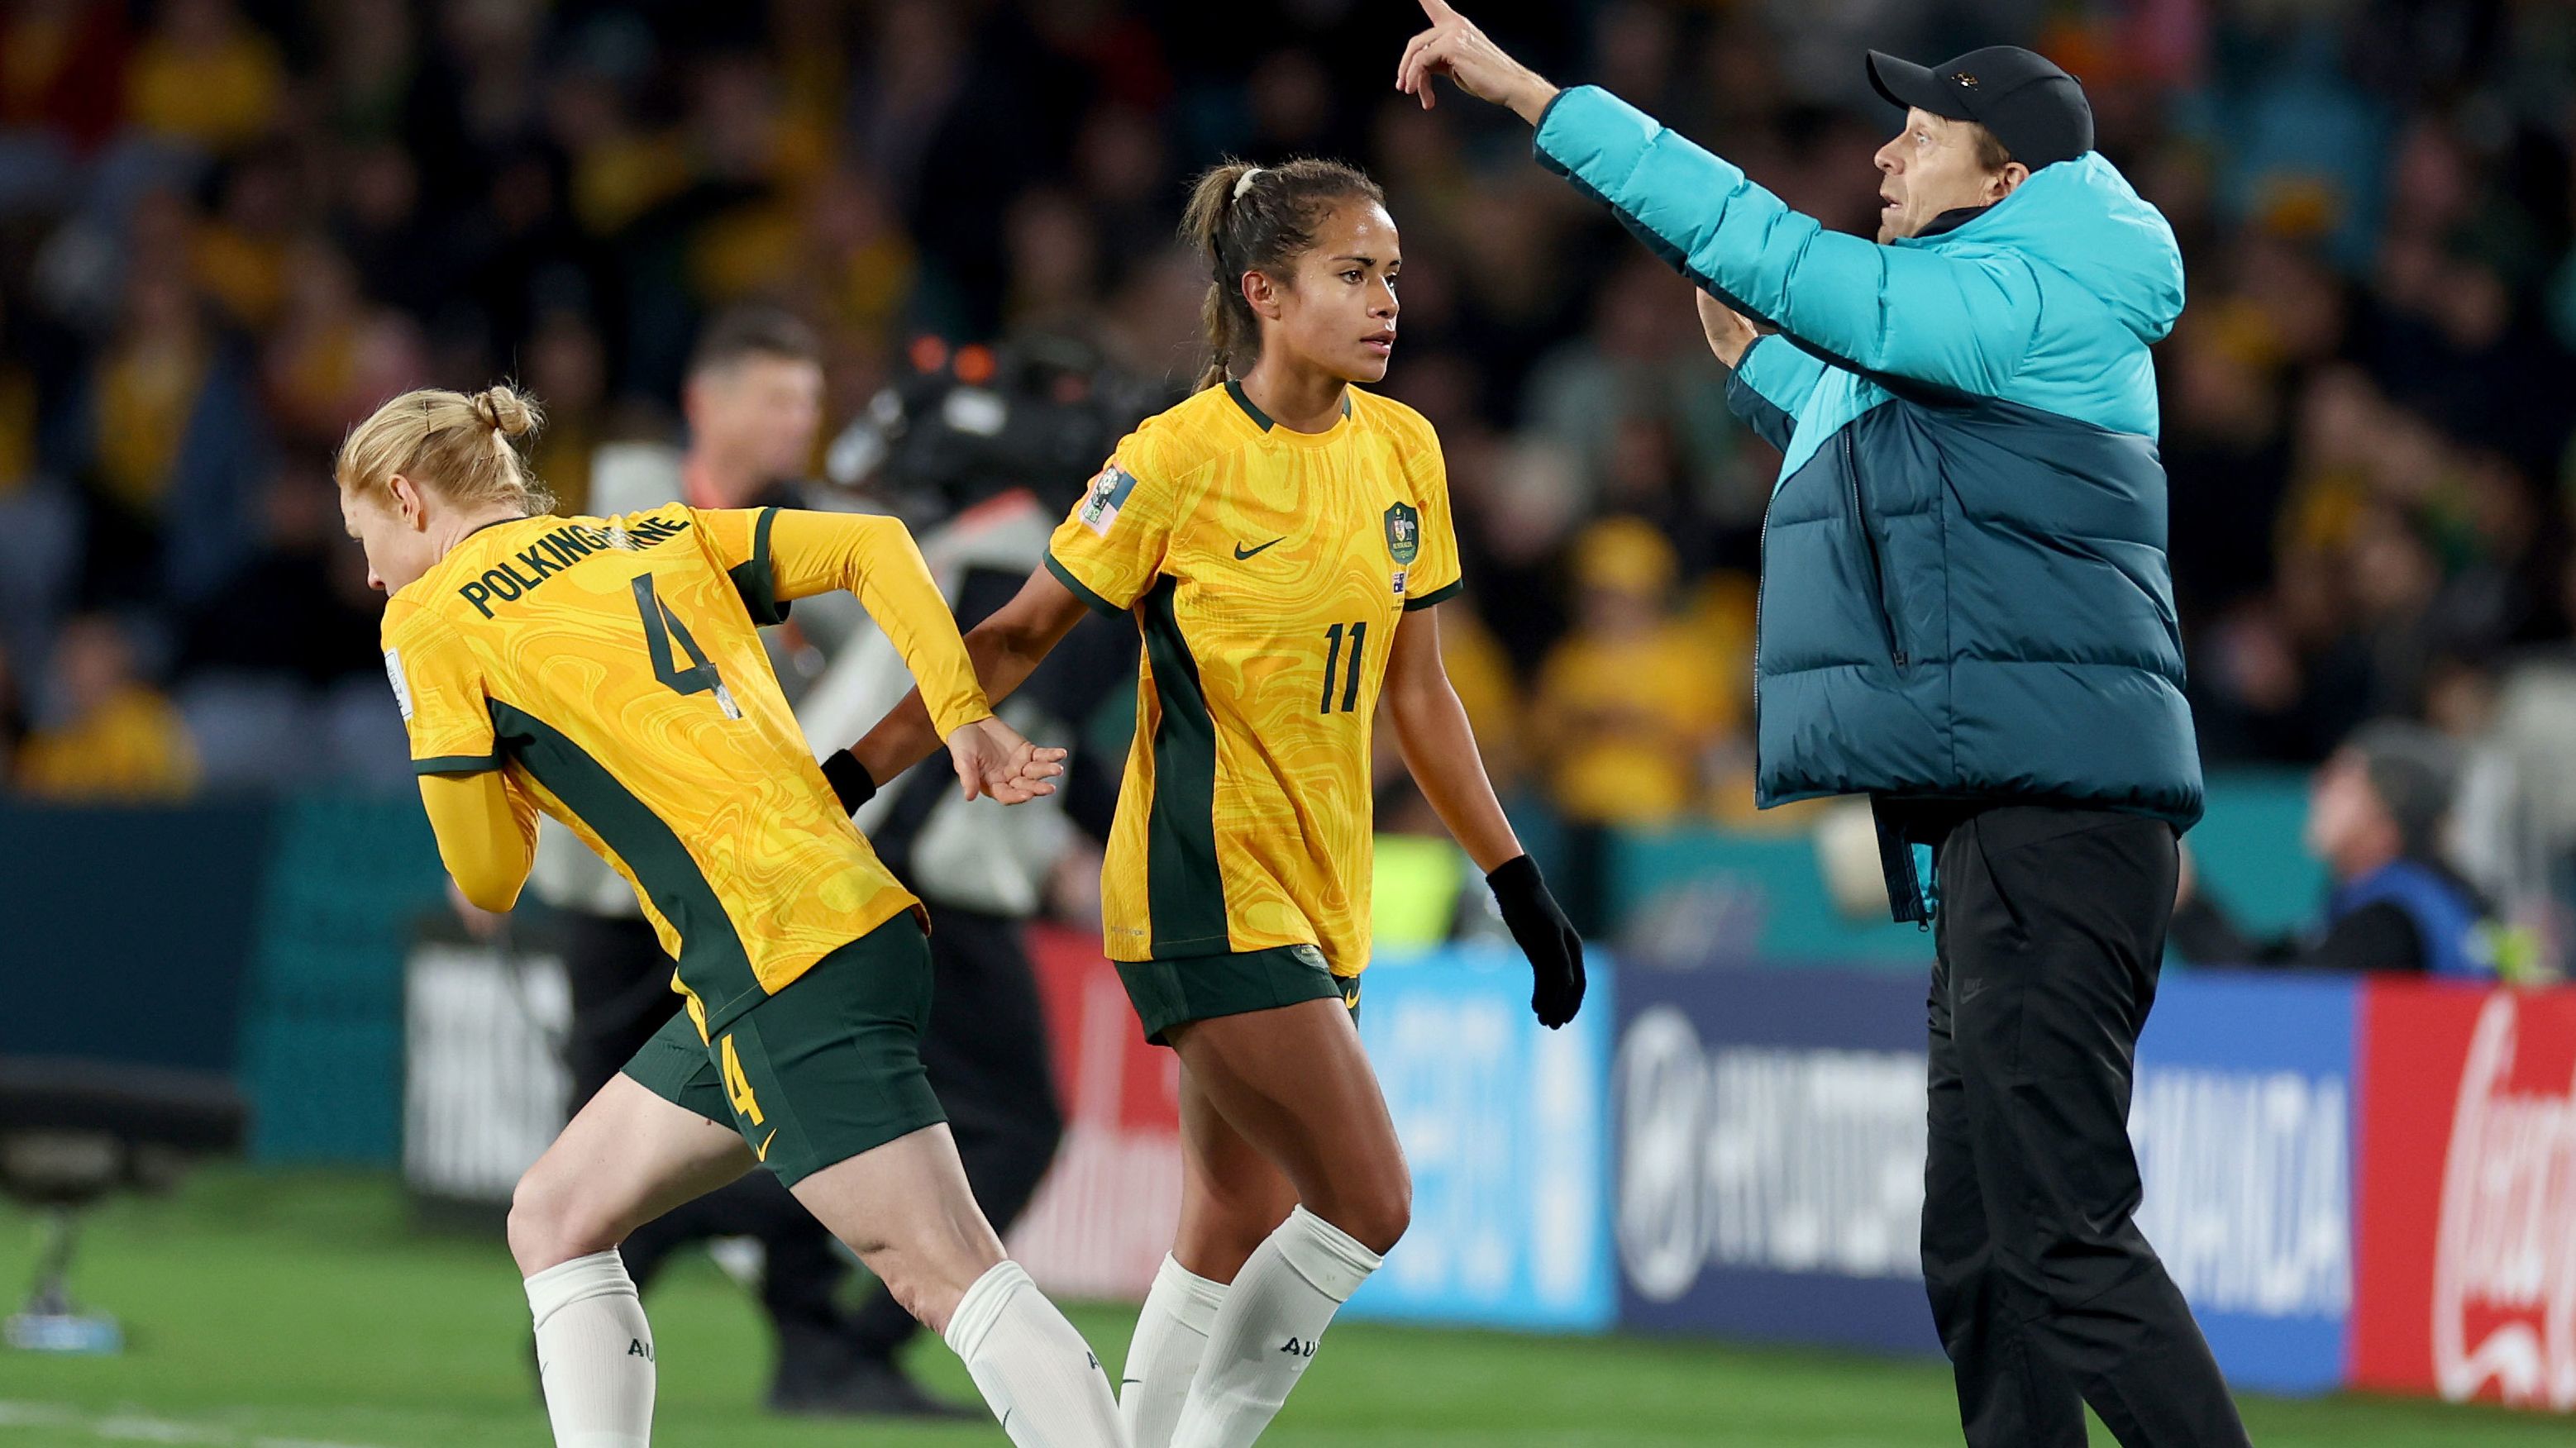 Clare Polkinghorne is brought on for Mary Fowler while Matildas coach Tony Gustavsson gives the team instructions during the second half of their clash with Ireland.